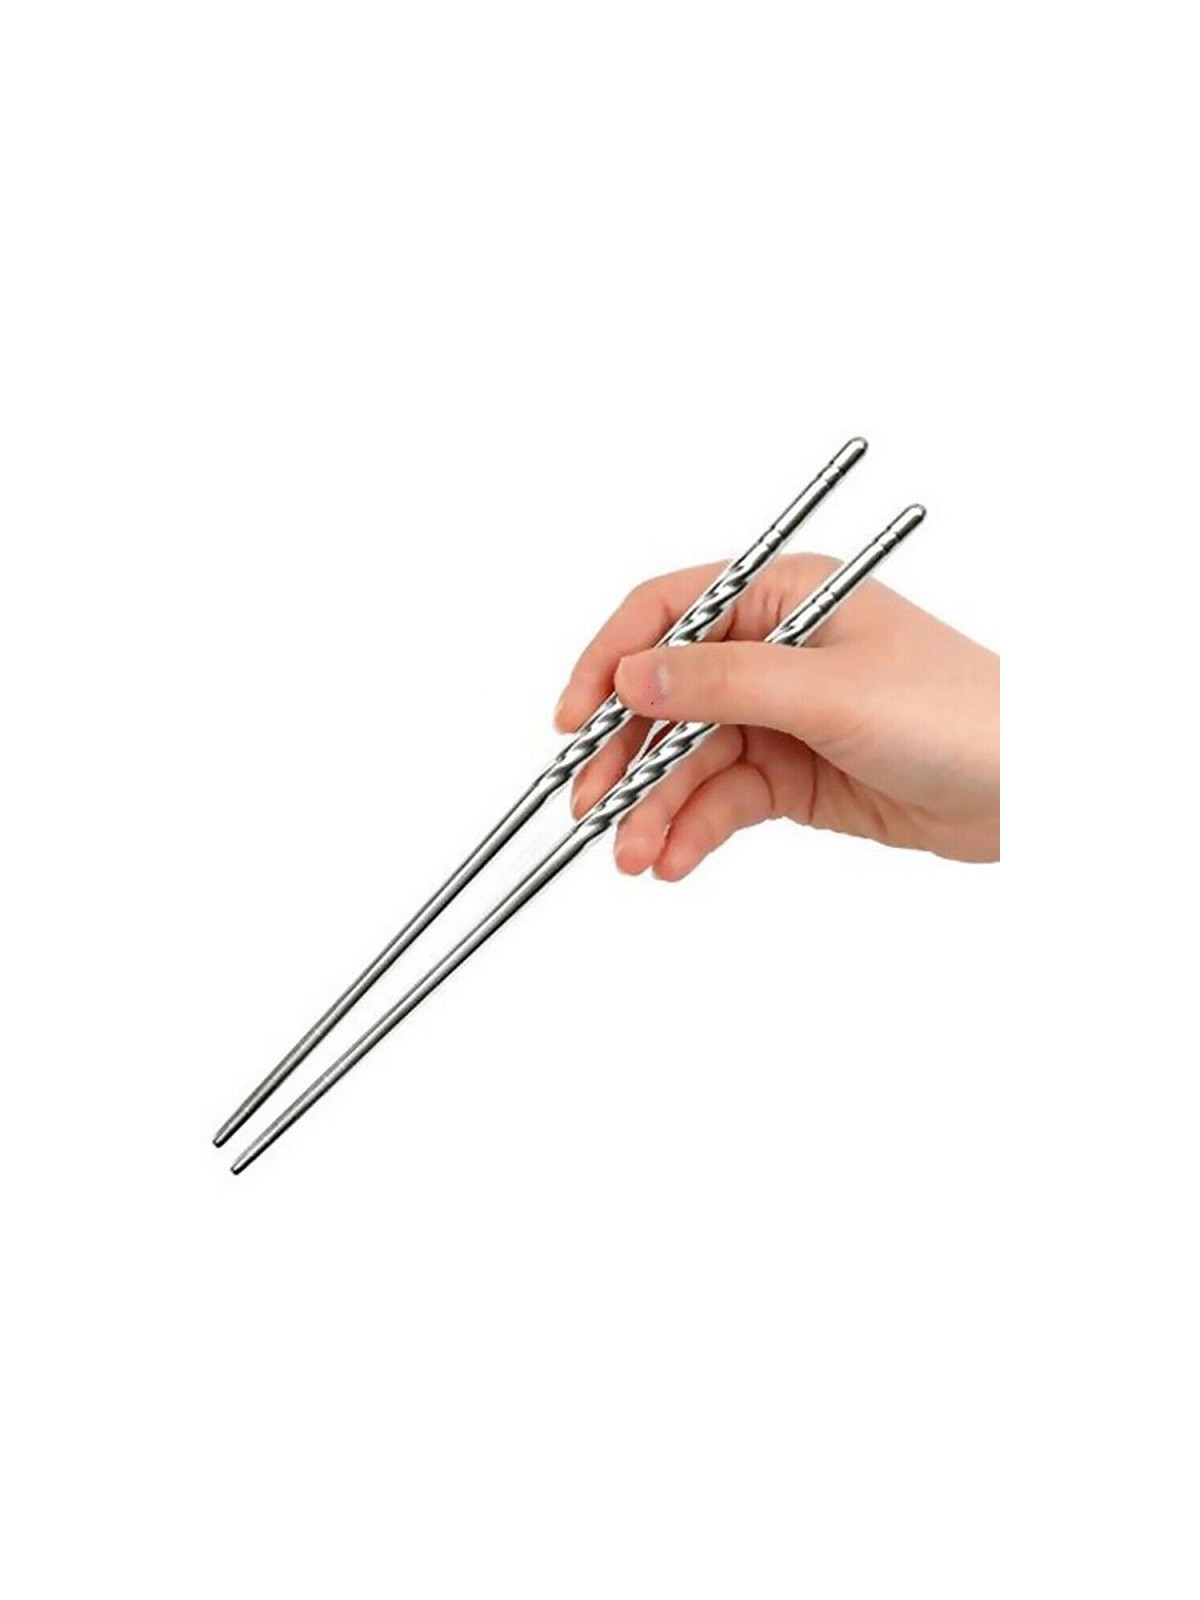 Chinese chopsticks made of stainless steel 4 pcs